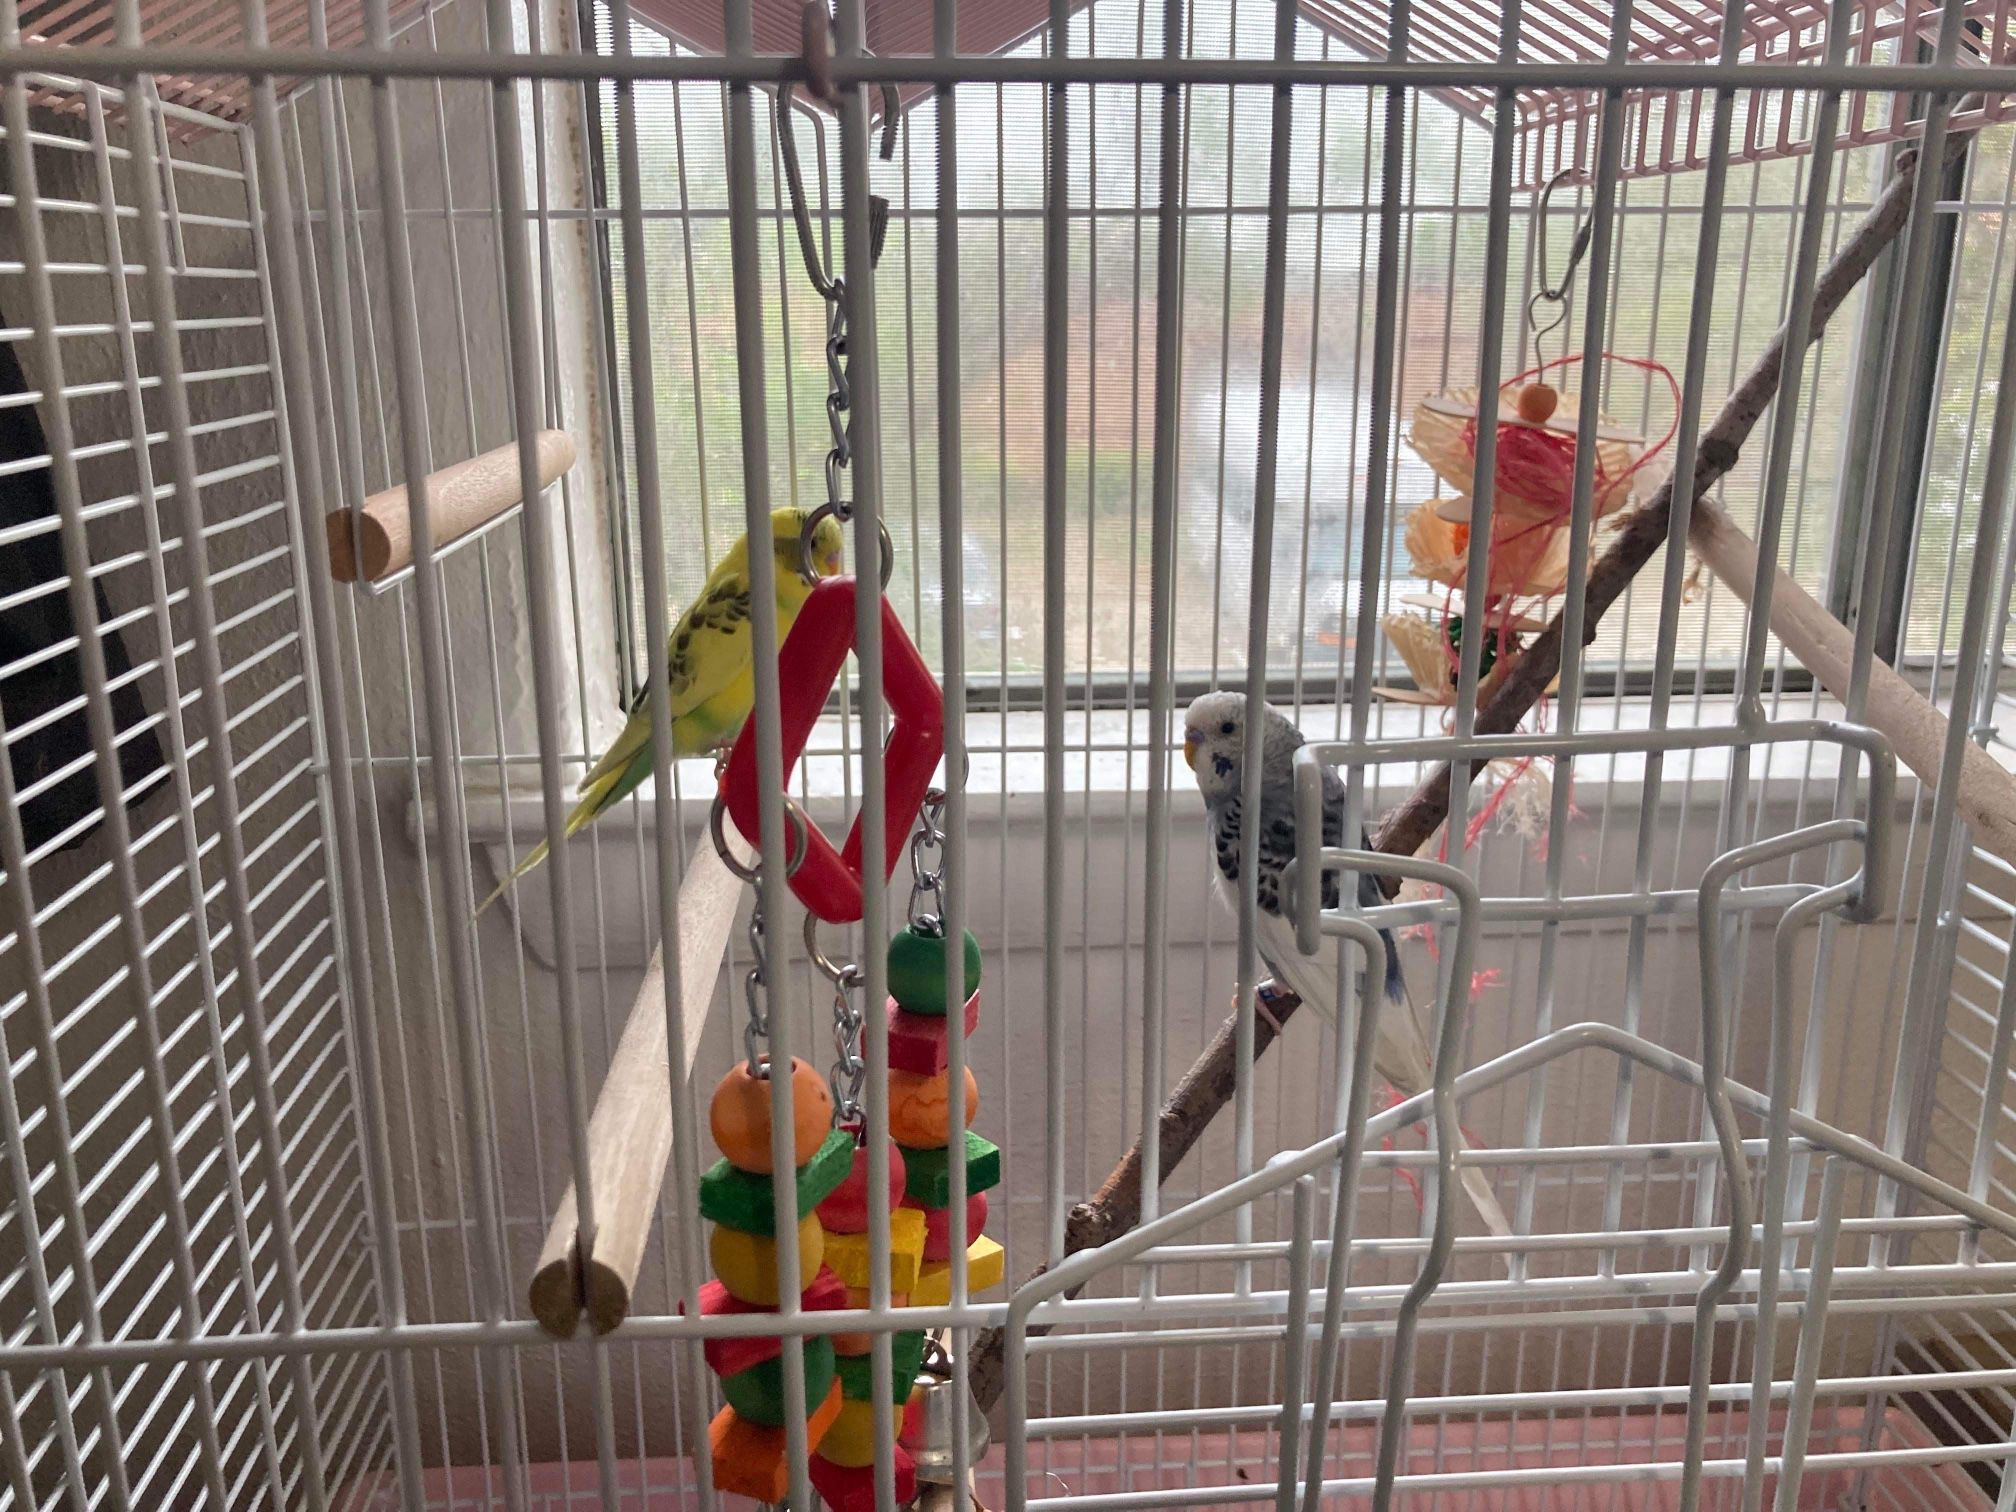 2 Parakeets with the bird cage